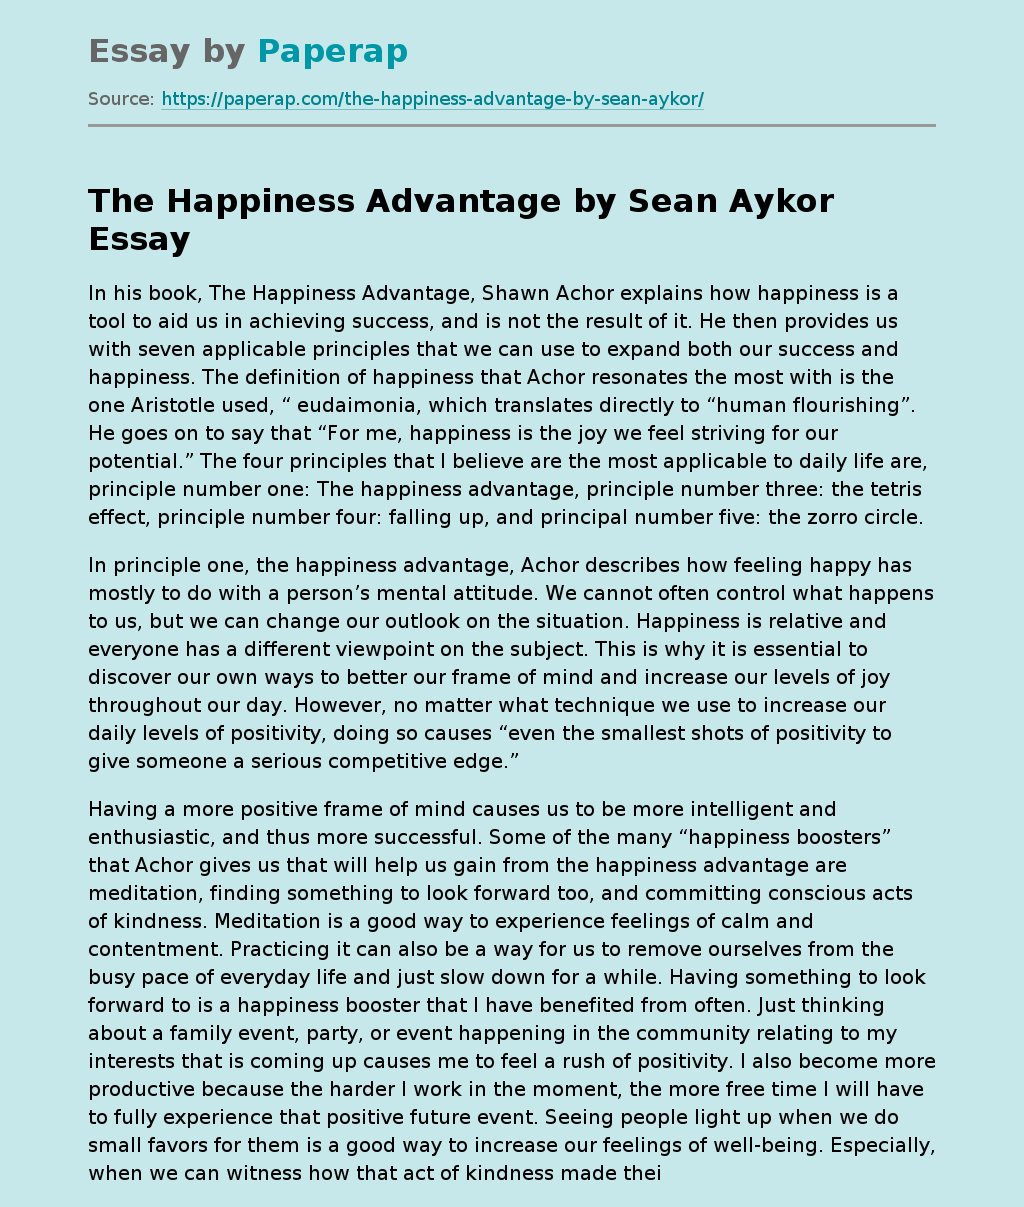 The Happiness Advantage by Sean Aykor